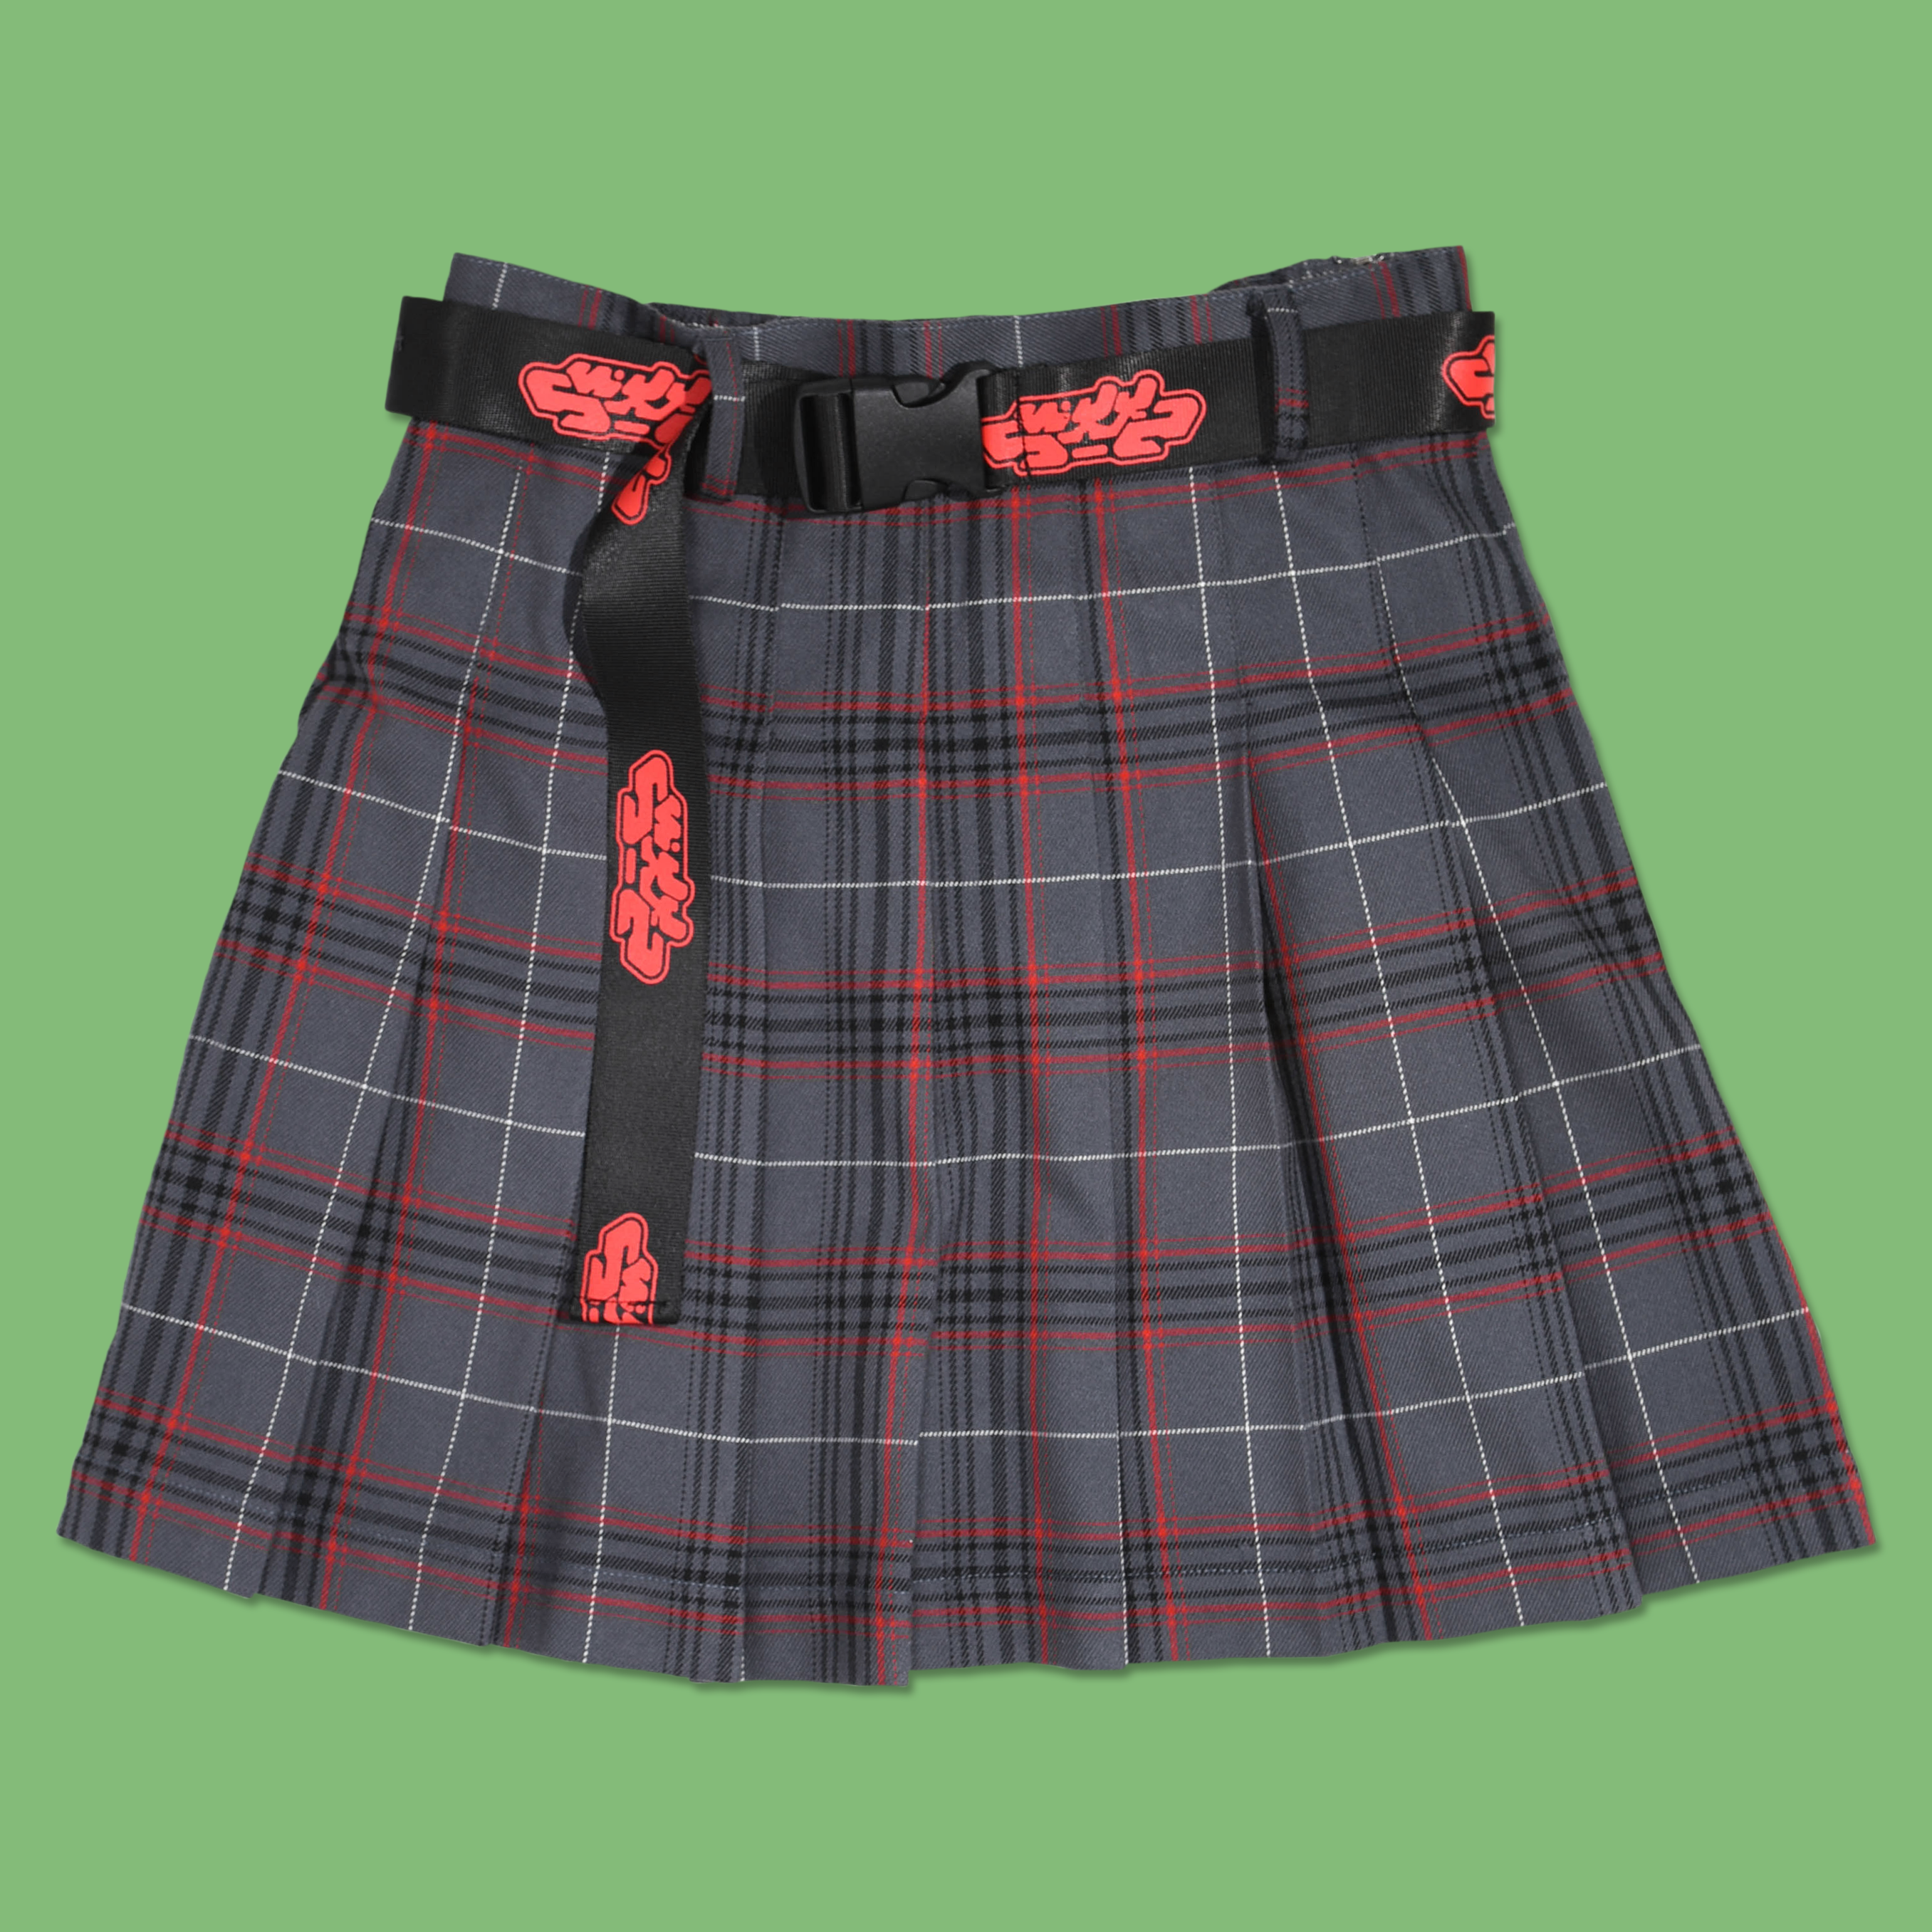 Anime Plaid Skirt from SWIXXZ by Maggie Lindemann - Front